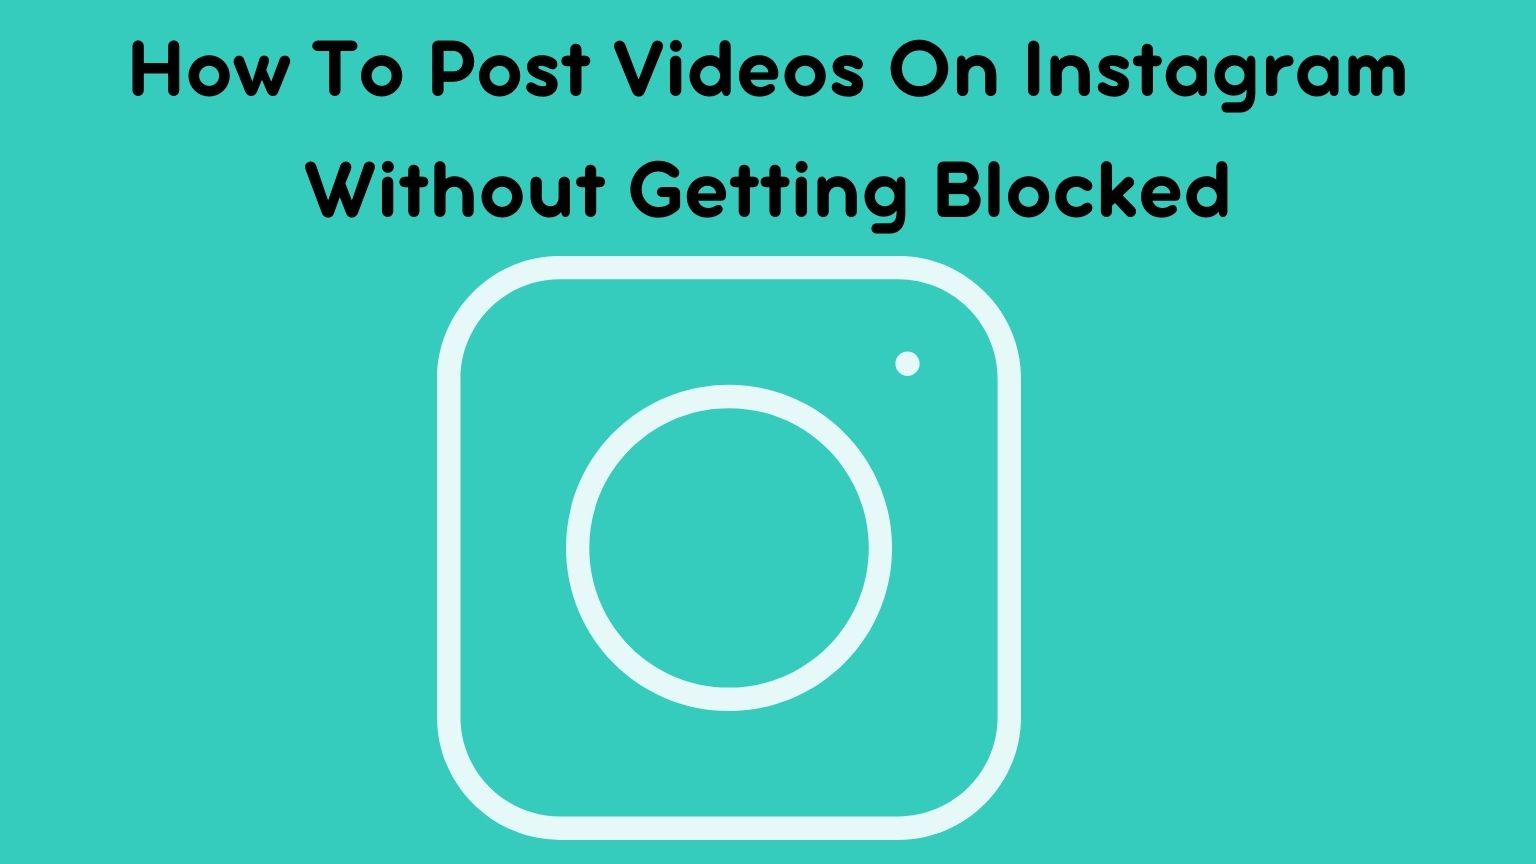 How To Post Videos On Instagram Without Getting Blocked